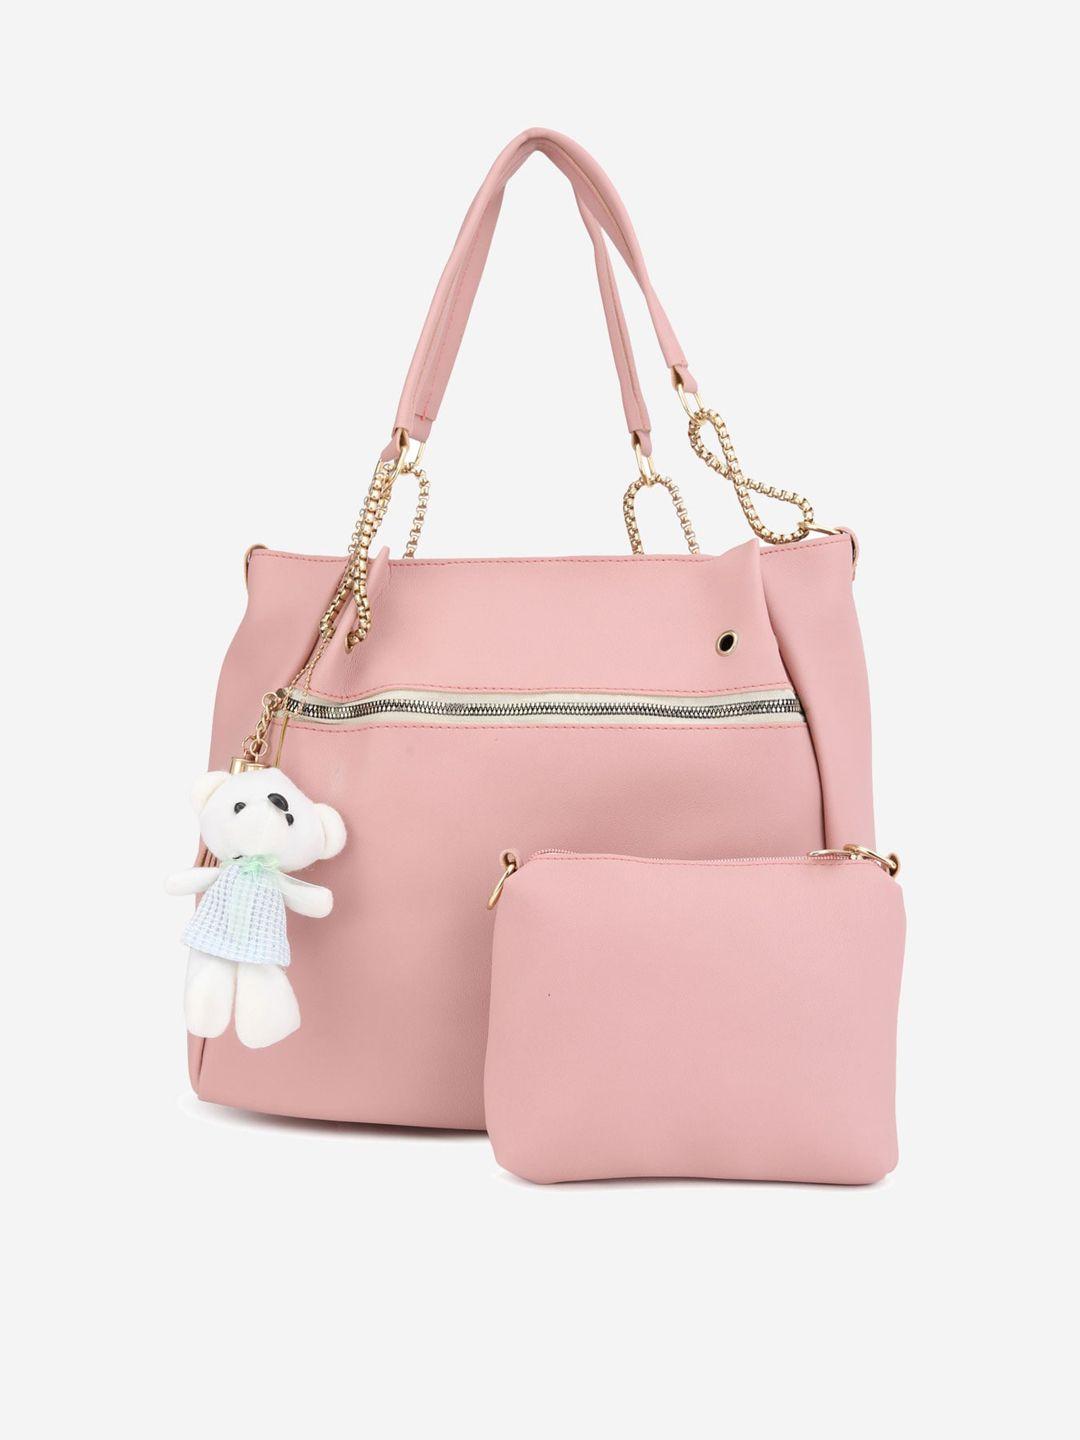 stropcarry pink swagger shoulder bag with tasselled details & pouch